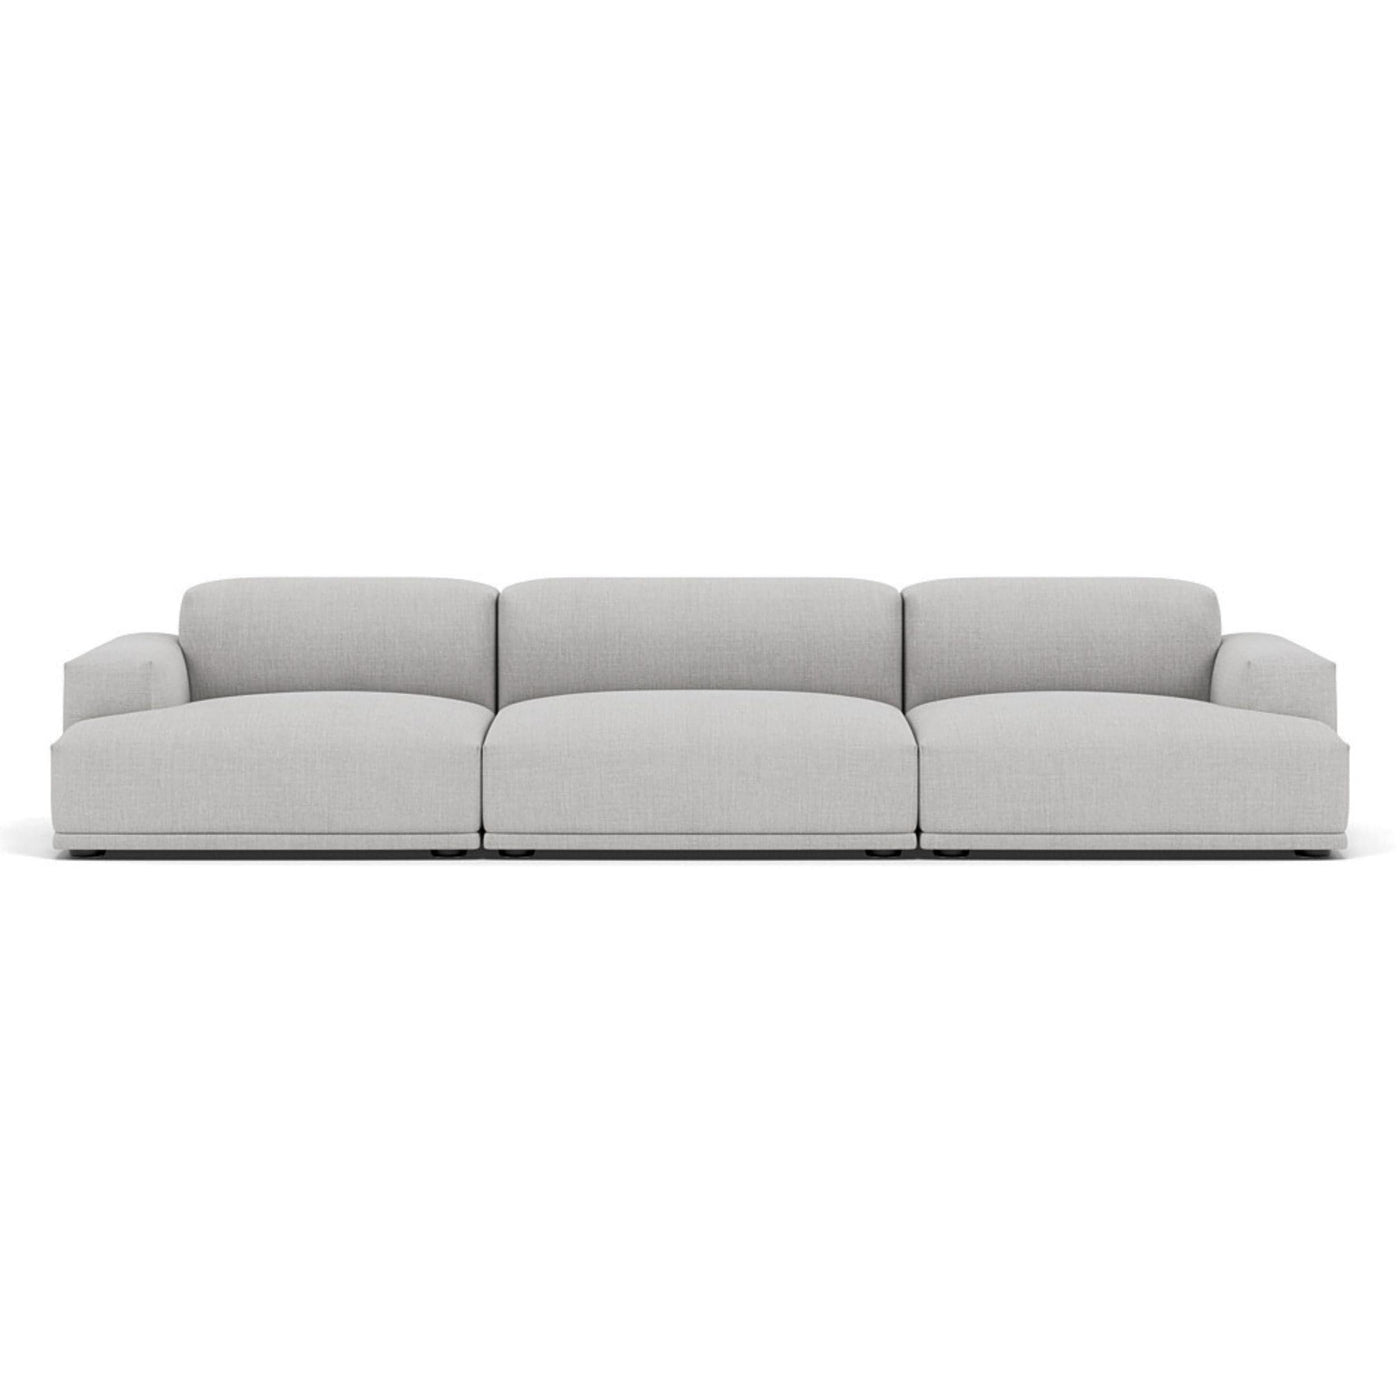 Muuto Connect modular sofa 3 seater in  light grey fabric. Made to order from someday designs. #colour_remix-123